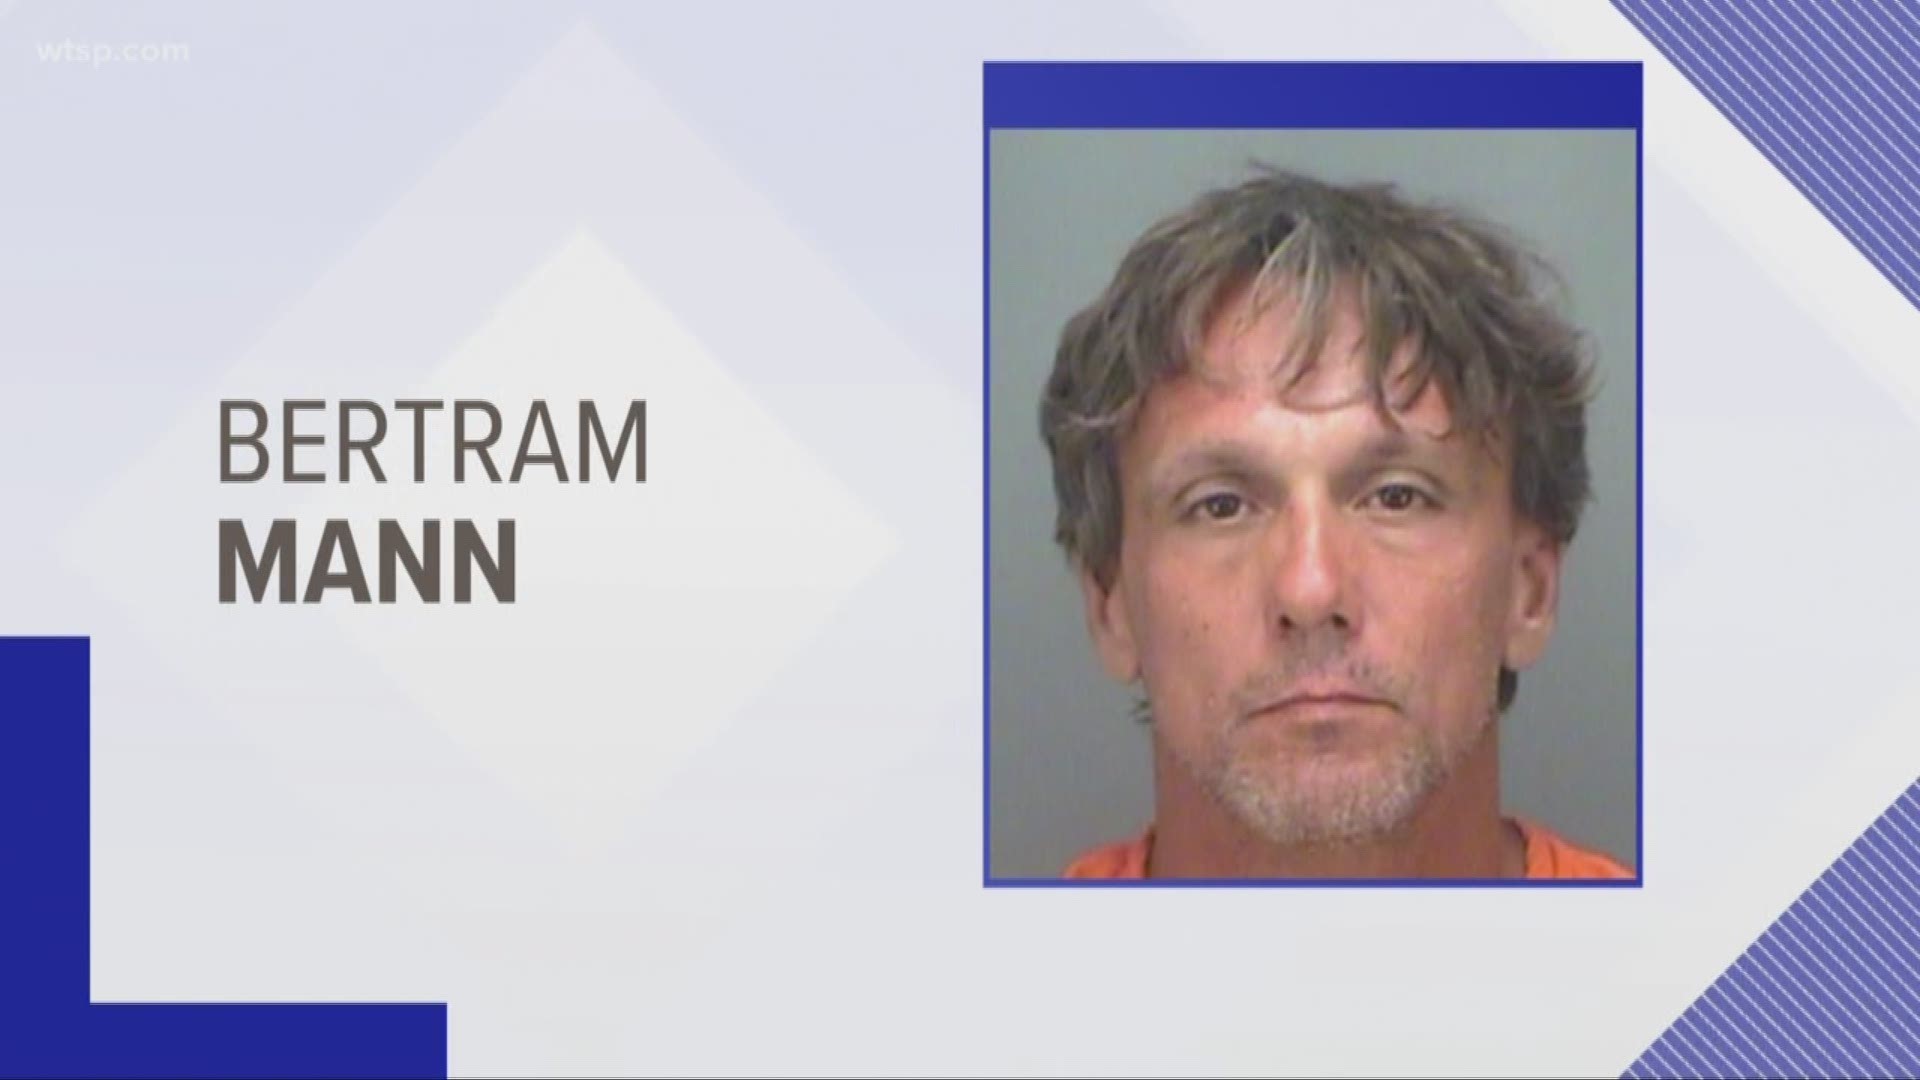 Bertram Mann placed a Molotov cocktail at the door of a man's trailer before attacking him with a hatchet, police say.